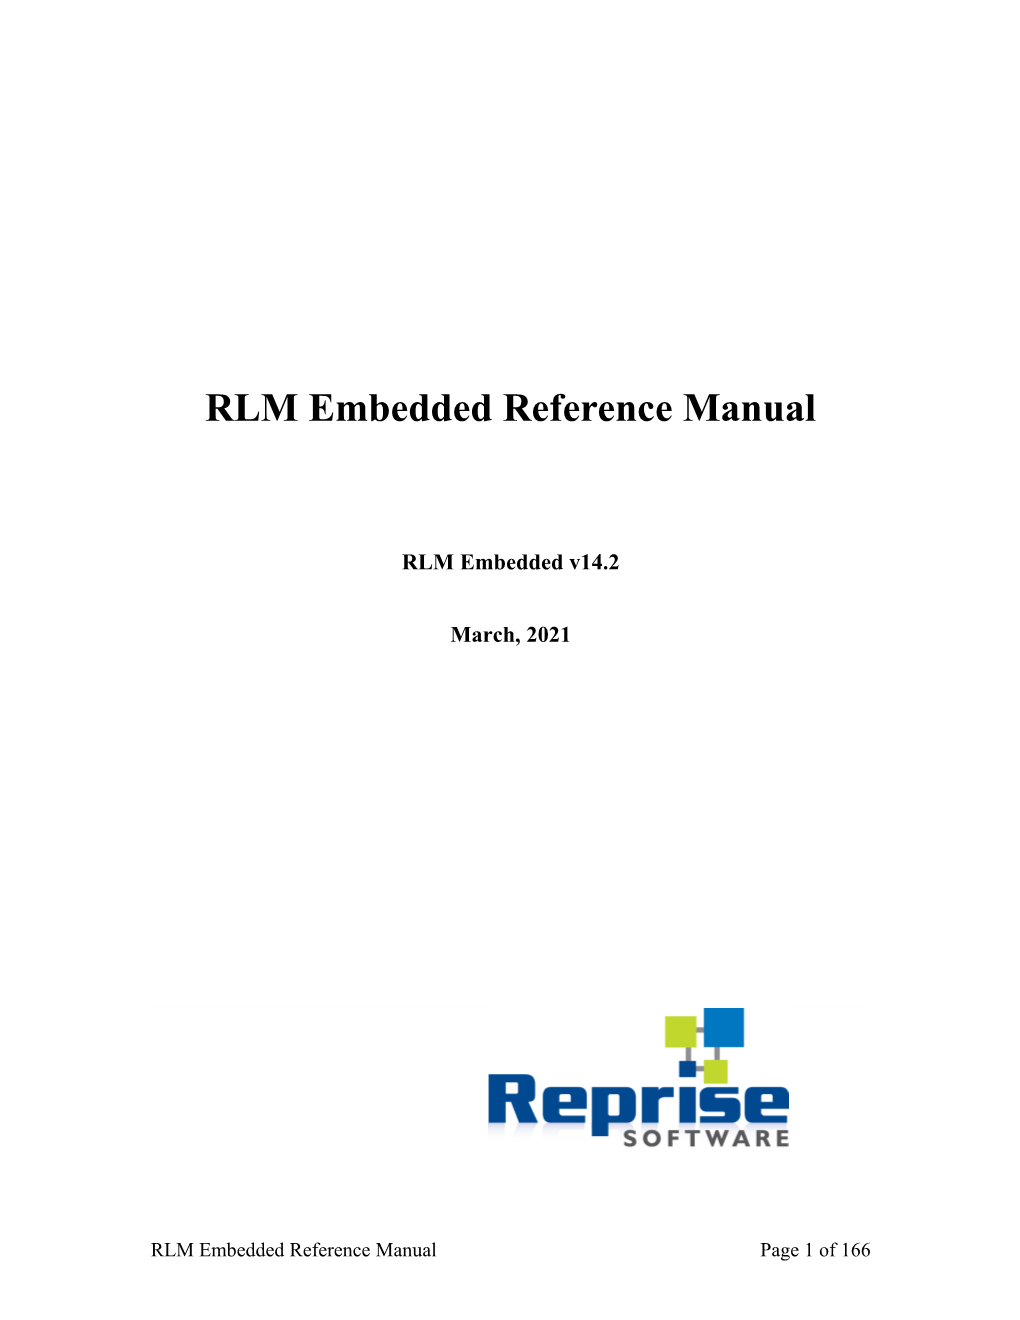 RLM Documentation Is Divided Into 7 Manuals